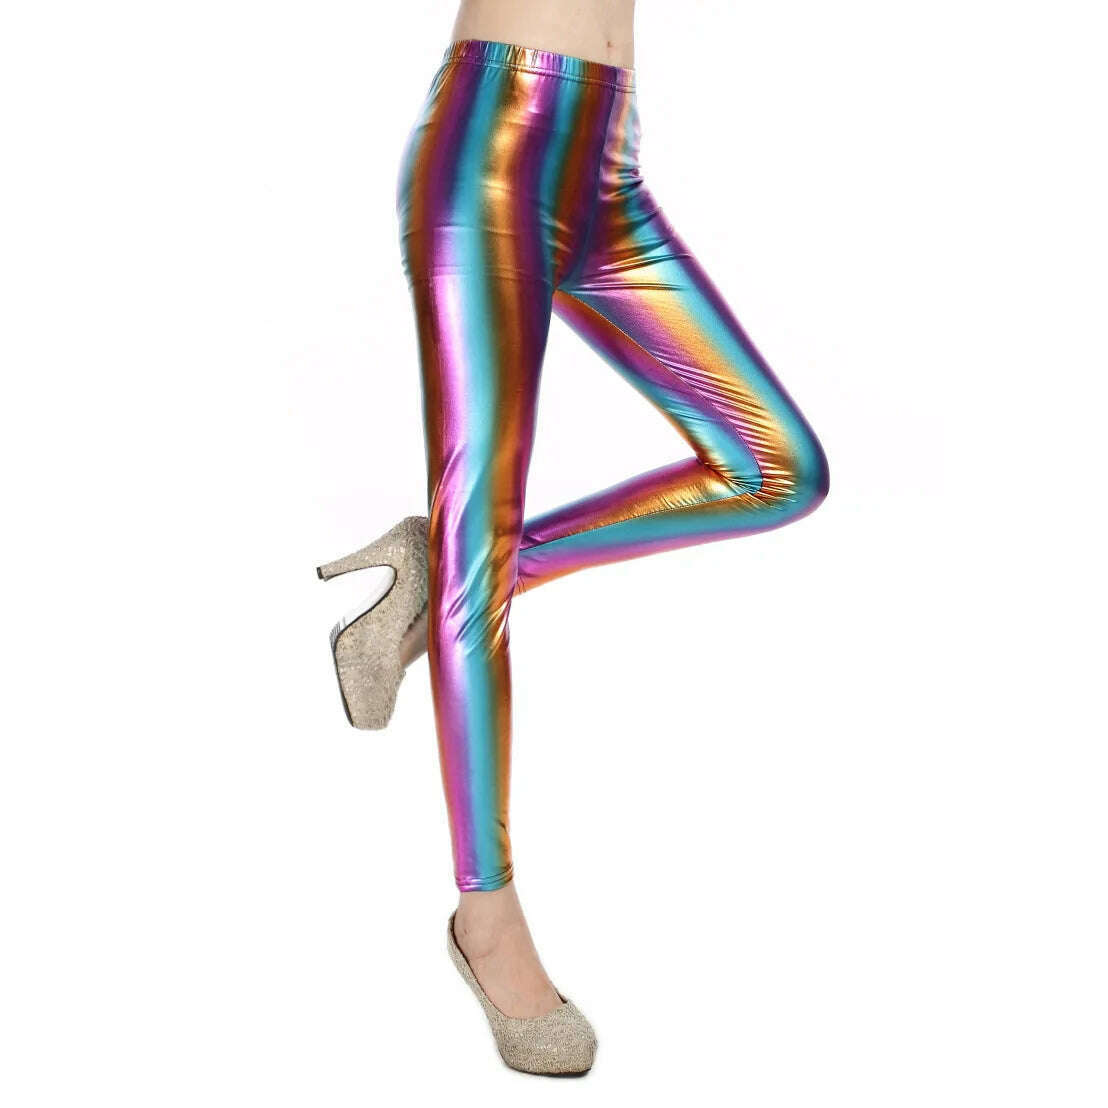 KIMLUD, Metallic Color PU Leggings Women Faux Leather Pants Dancing Party Pant Sexy Night Club Skinny Costume Pants Tight Trousers, Rainbow / One size 50kg below, KIMLUD Womens Clothes